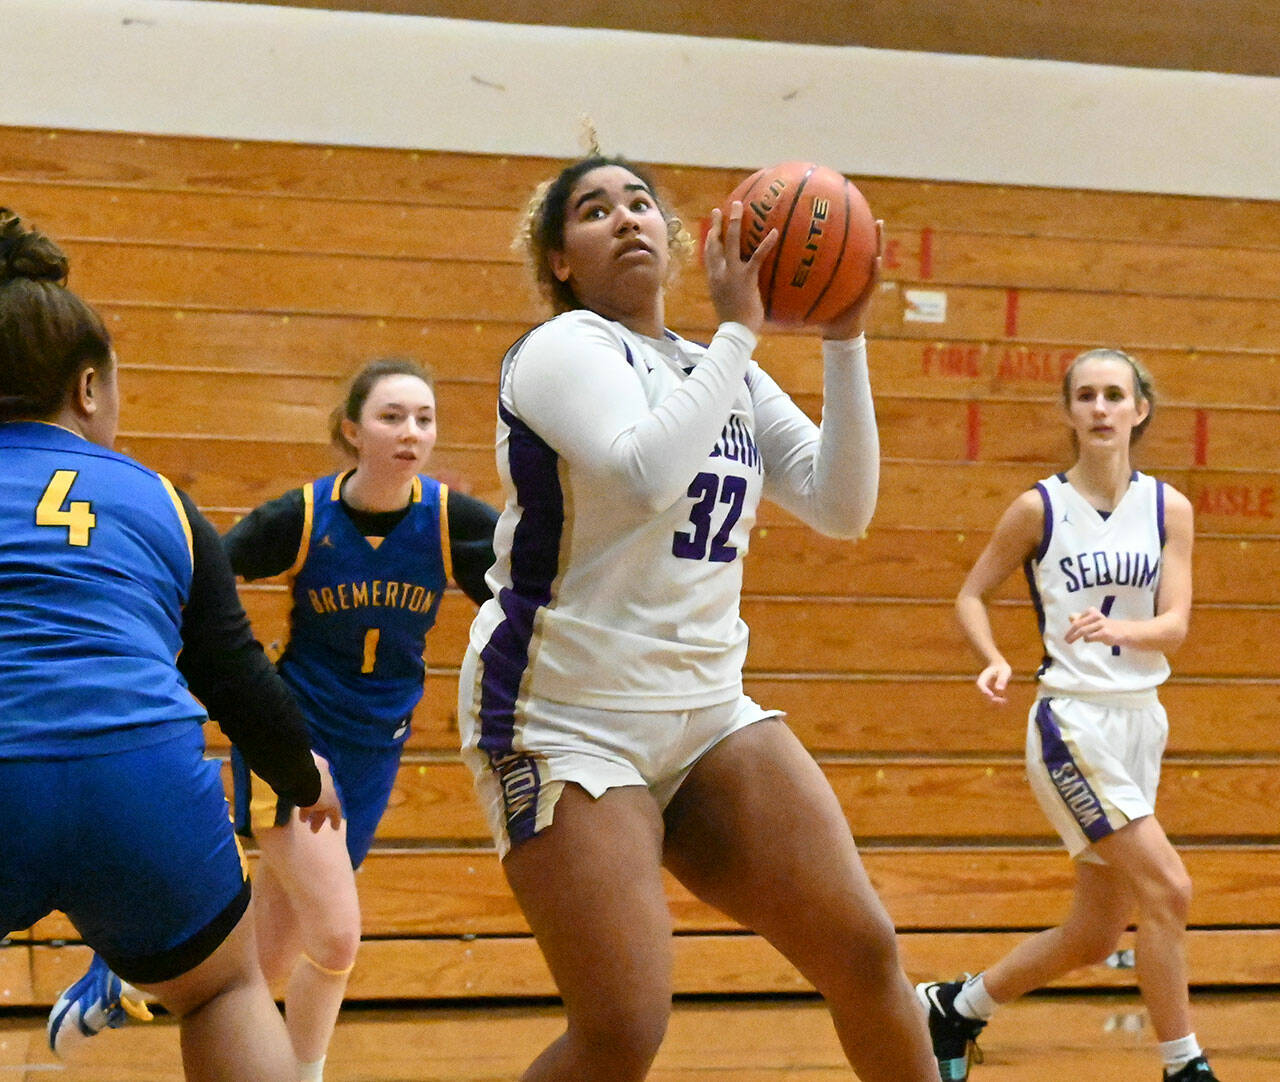 Sequim Gazette photo by Michael Dashiell
Sequim’s Jelissa Julmist looks to put up a shot in the Wolves’ 71-46 home win over Bremerton on Jan. 22.